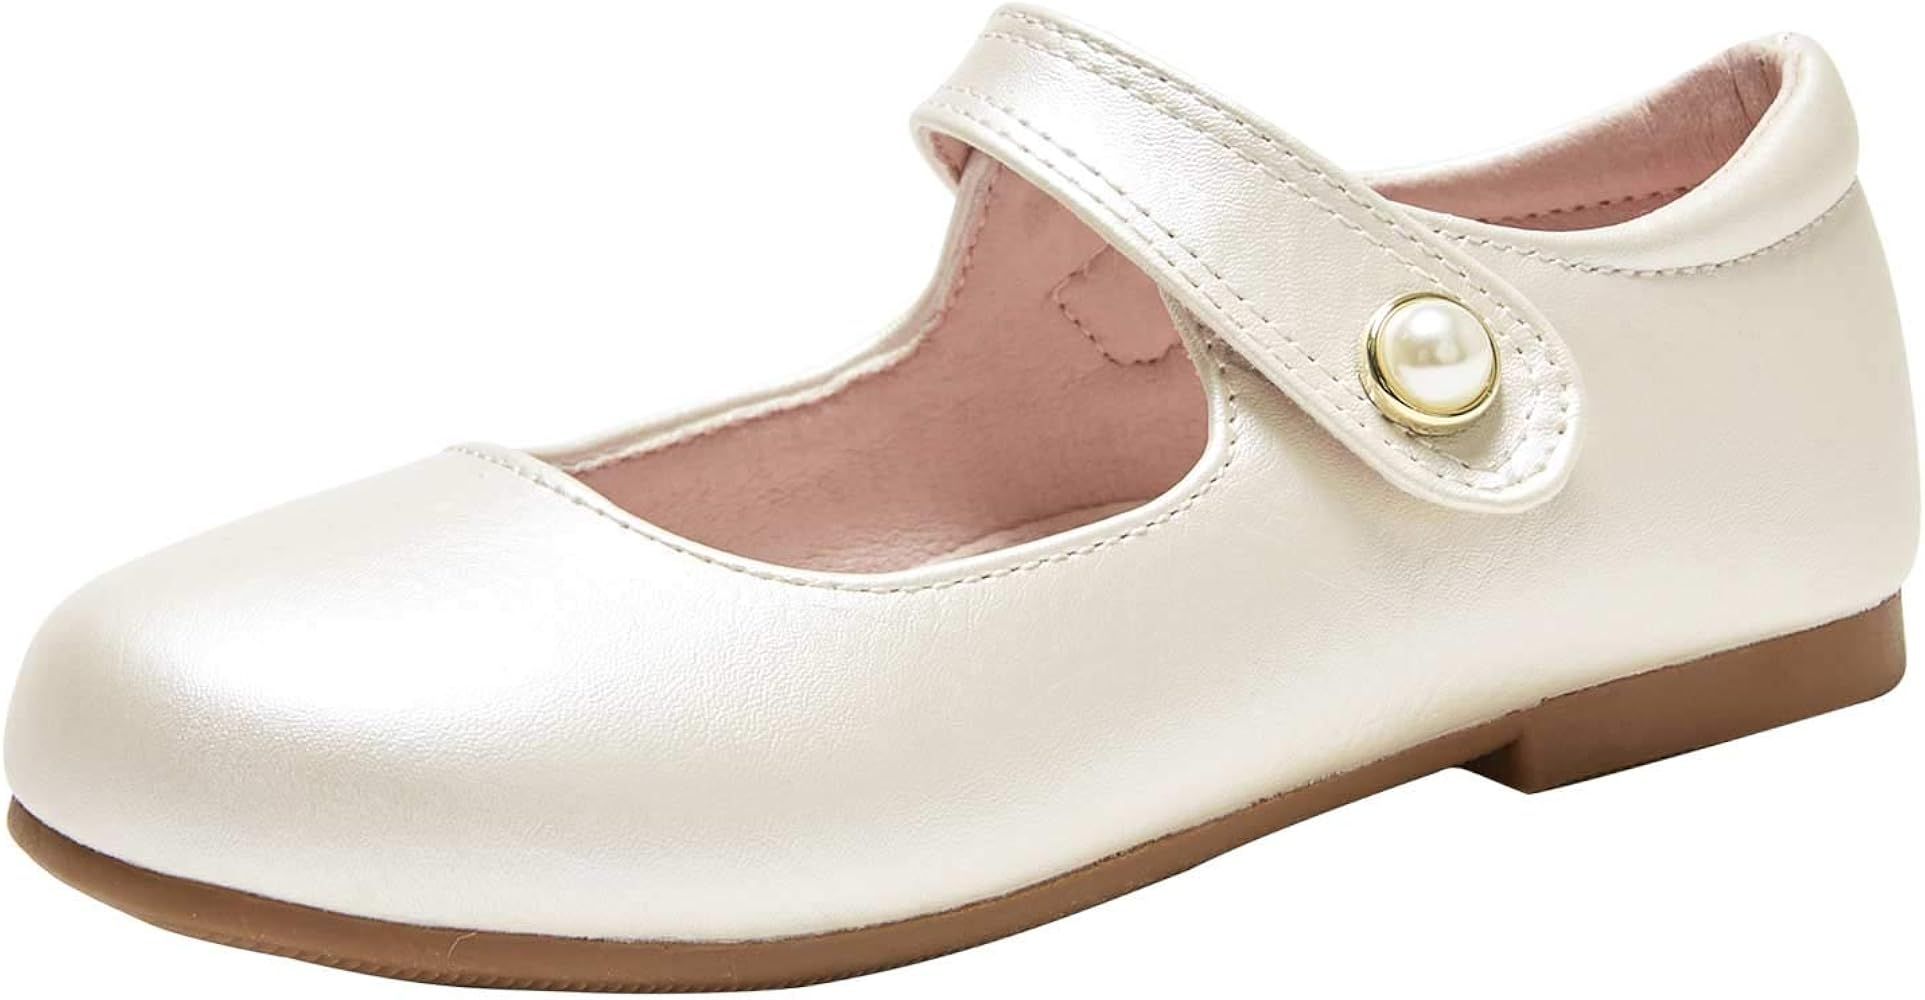 Stelle Girls Mary Jane Flats Slip-on Party Dress Shoes for Kids | Amazon (US)